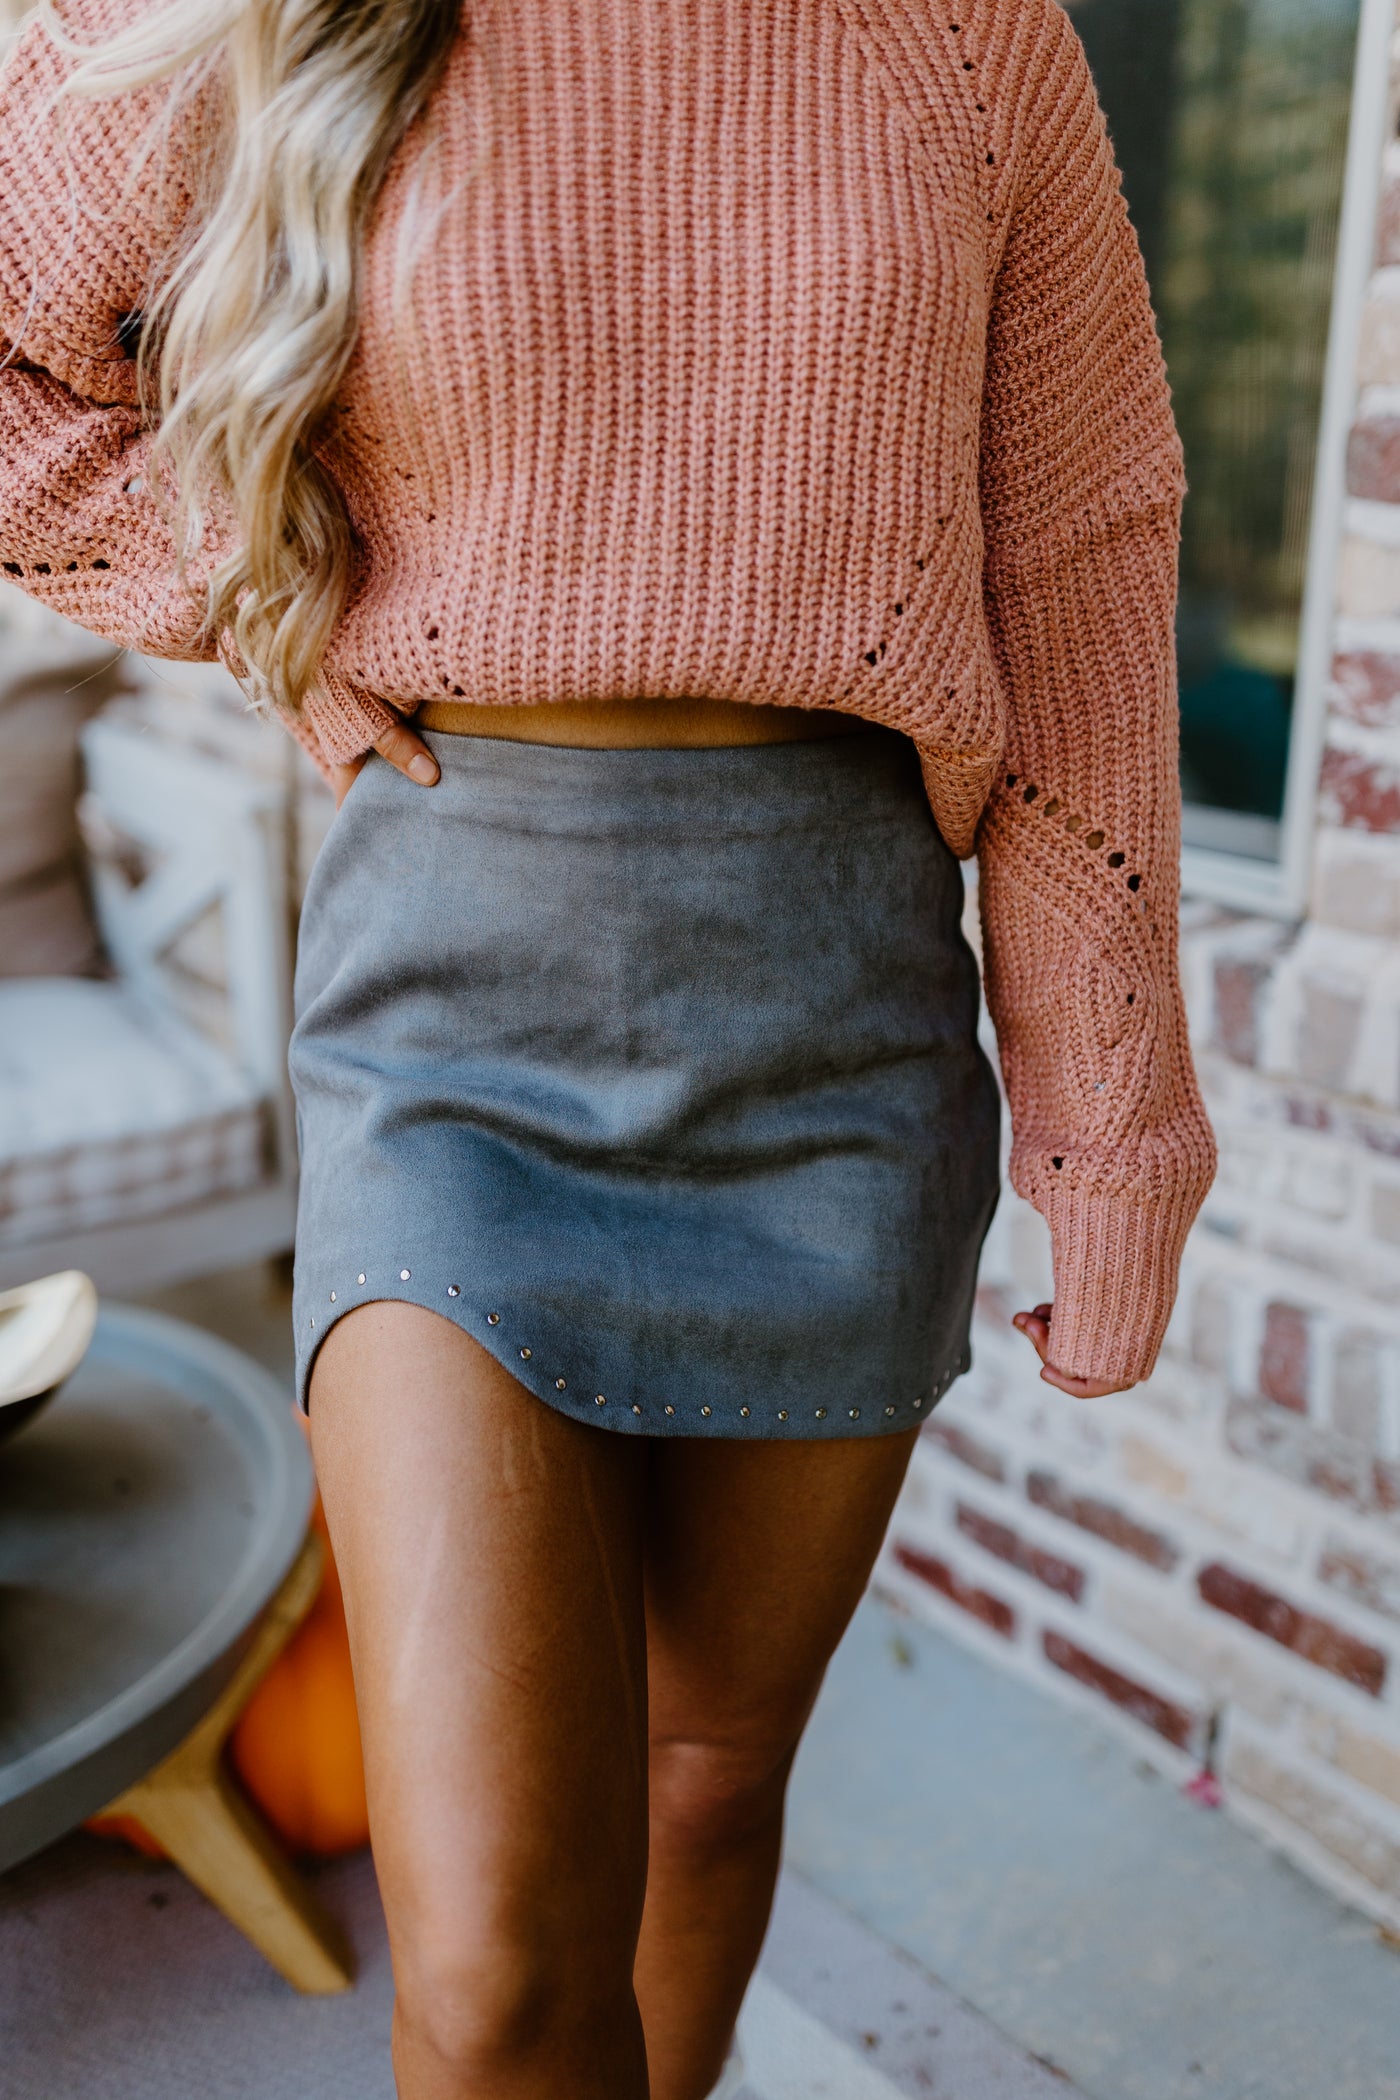 Suede Studded Skirt